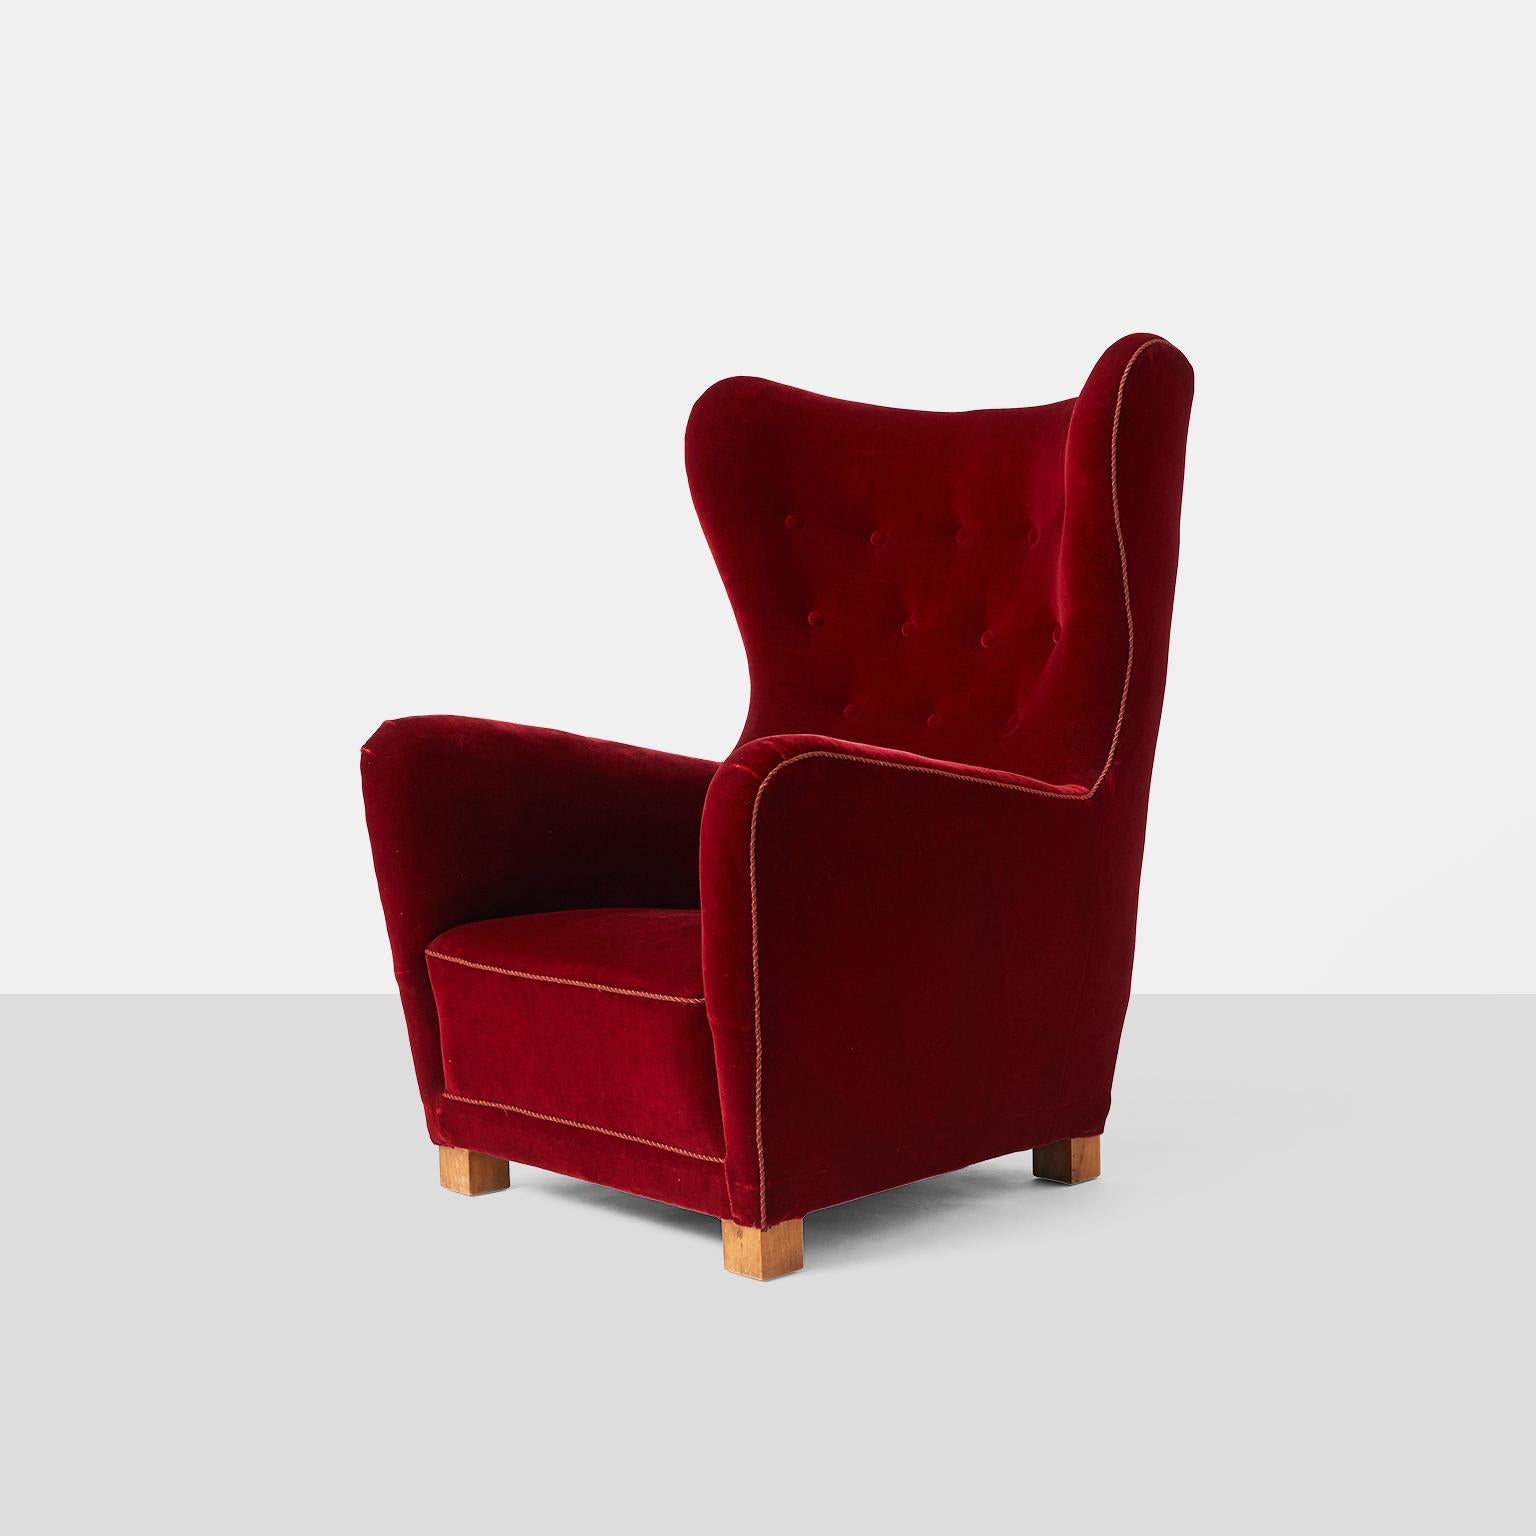 Fritz Hansen lounge chair model #1672
A large scale lounge chair by Fritz Hansen upholstered in a luxurious red velvet with corded trim on block style oak legs.
Denmark, circa 1930s.